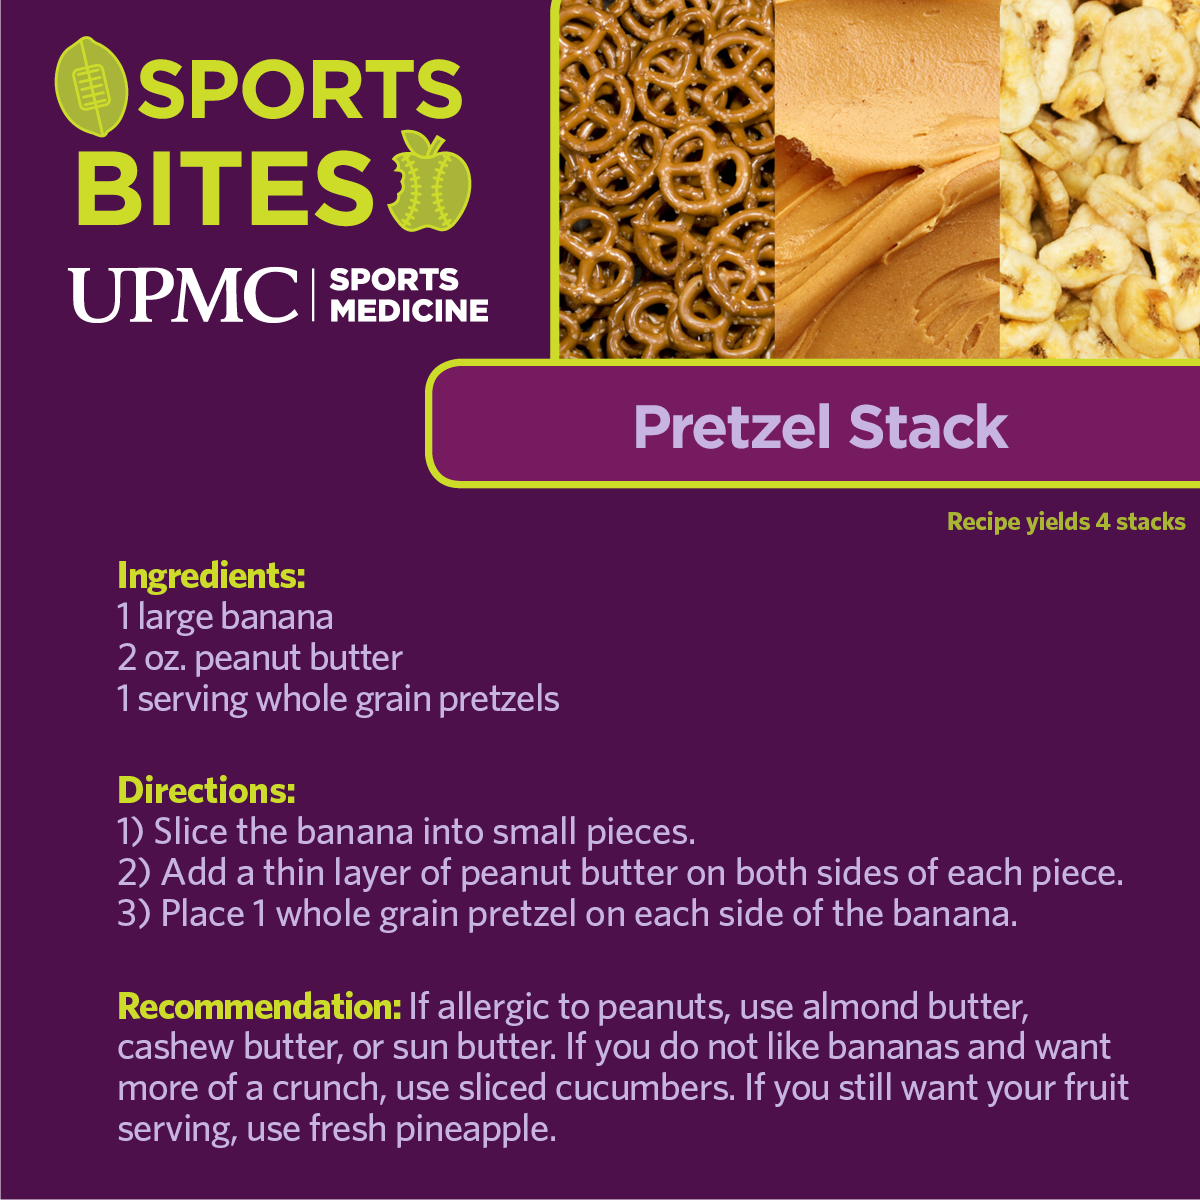 Learn how to make this healthy pretzel snack